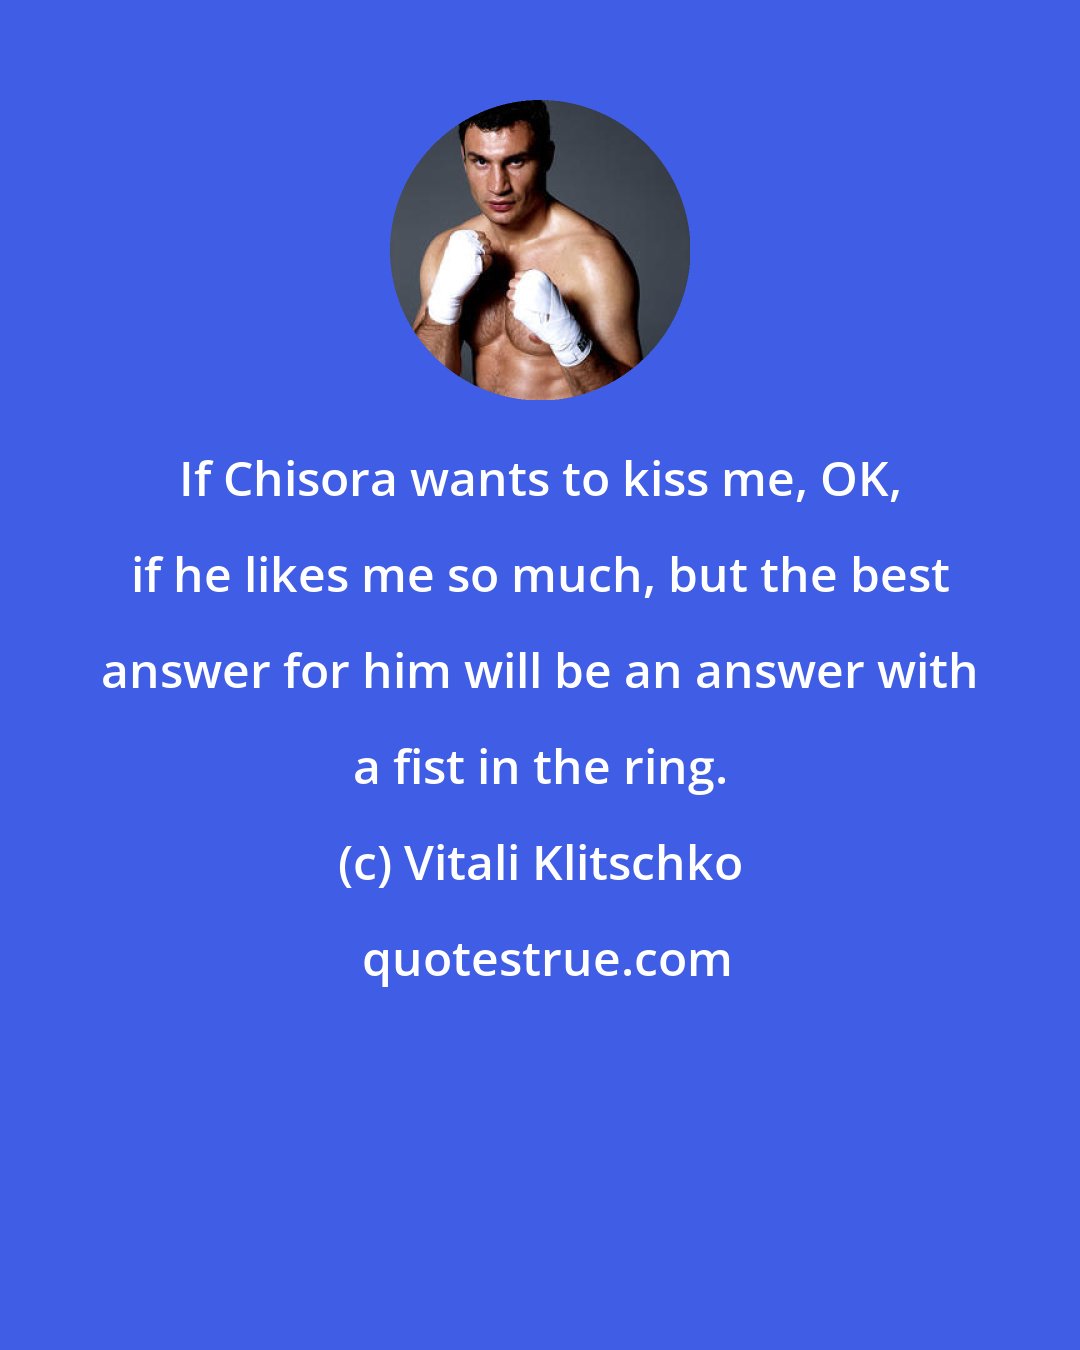 Vitali Klitschko: If Chisora wants to kiss me, OK, if he likes me so much, but the best answer for him will be an answer with a fist in the ring.